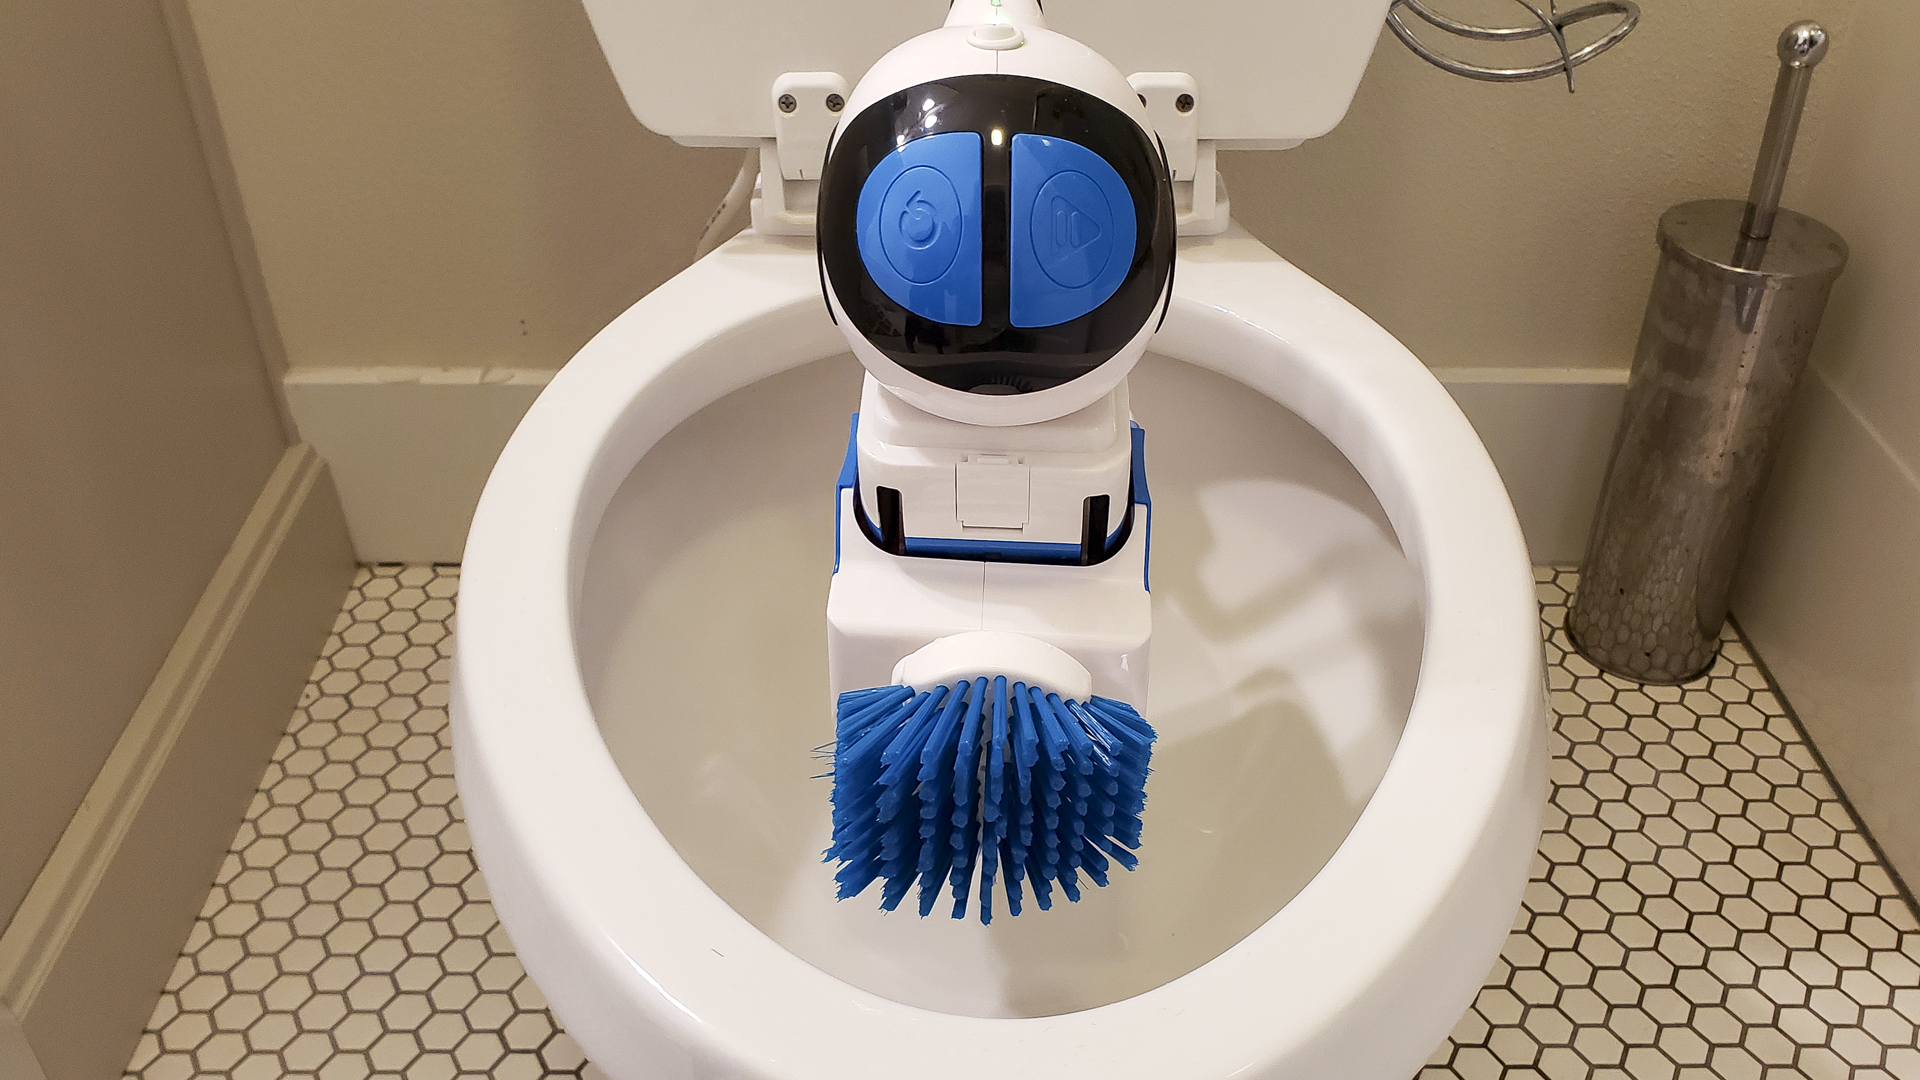 11 Smart Bathroom Cleaners for Spring Cleaning